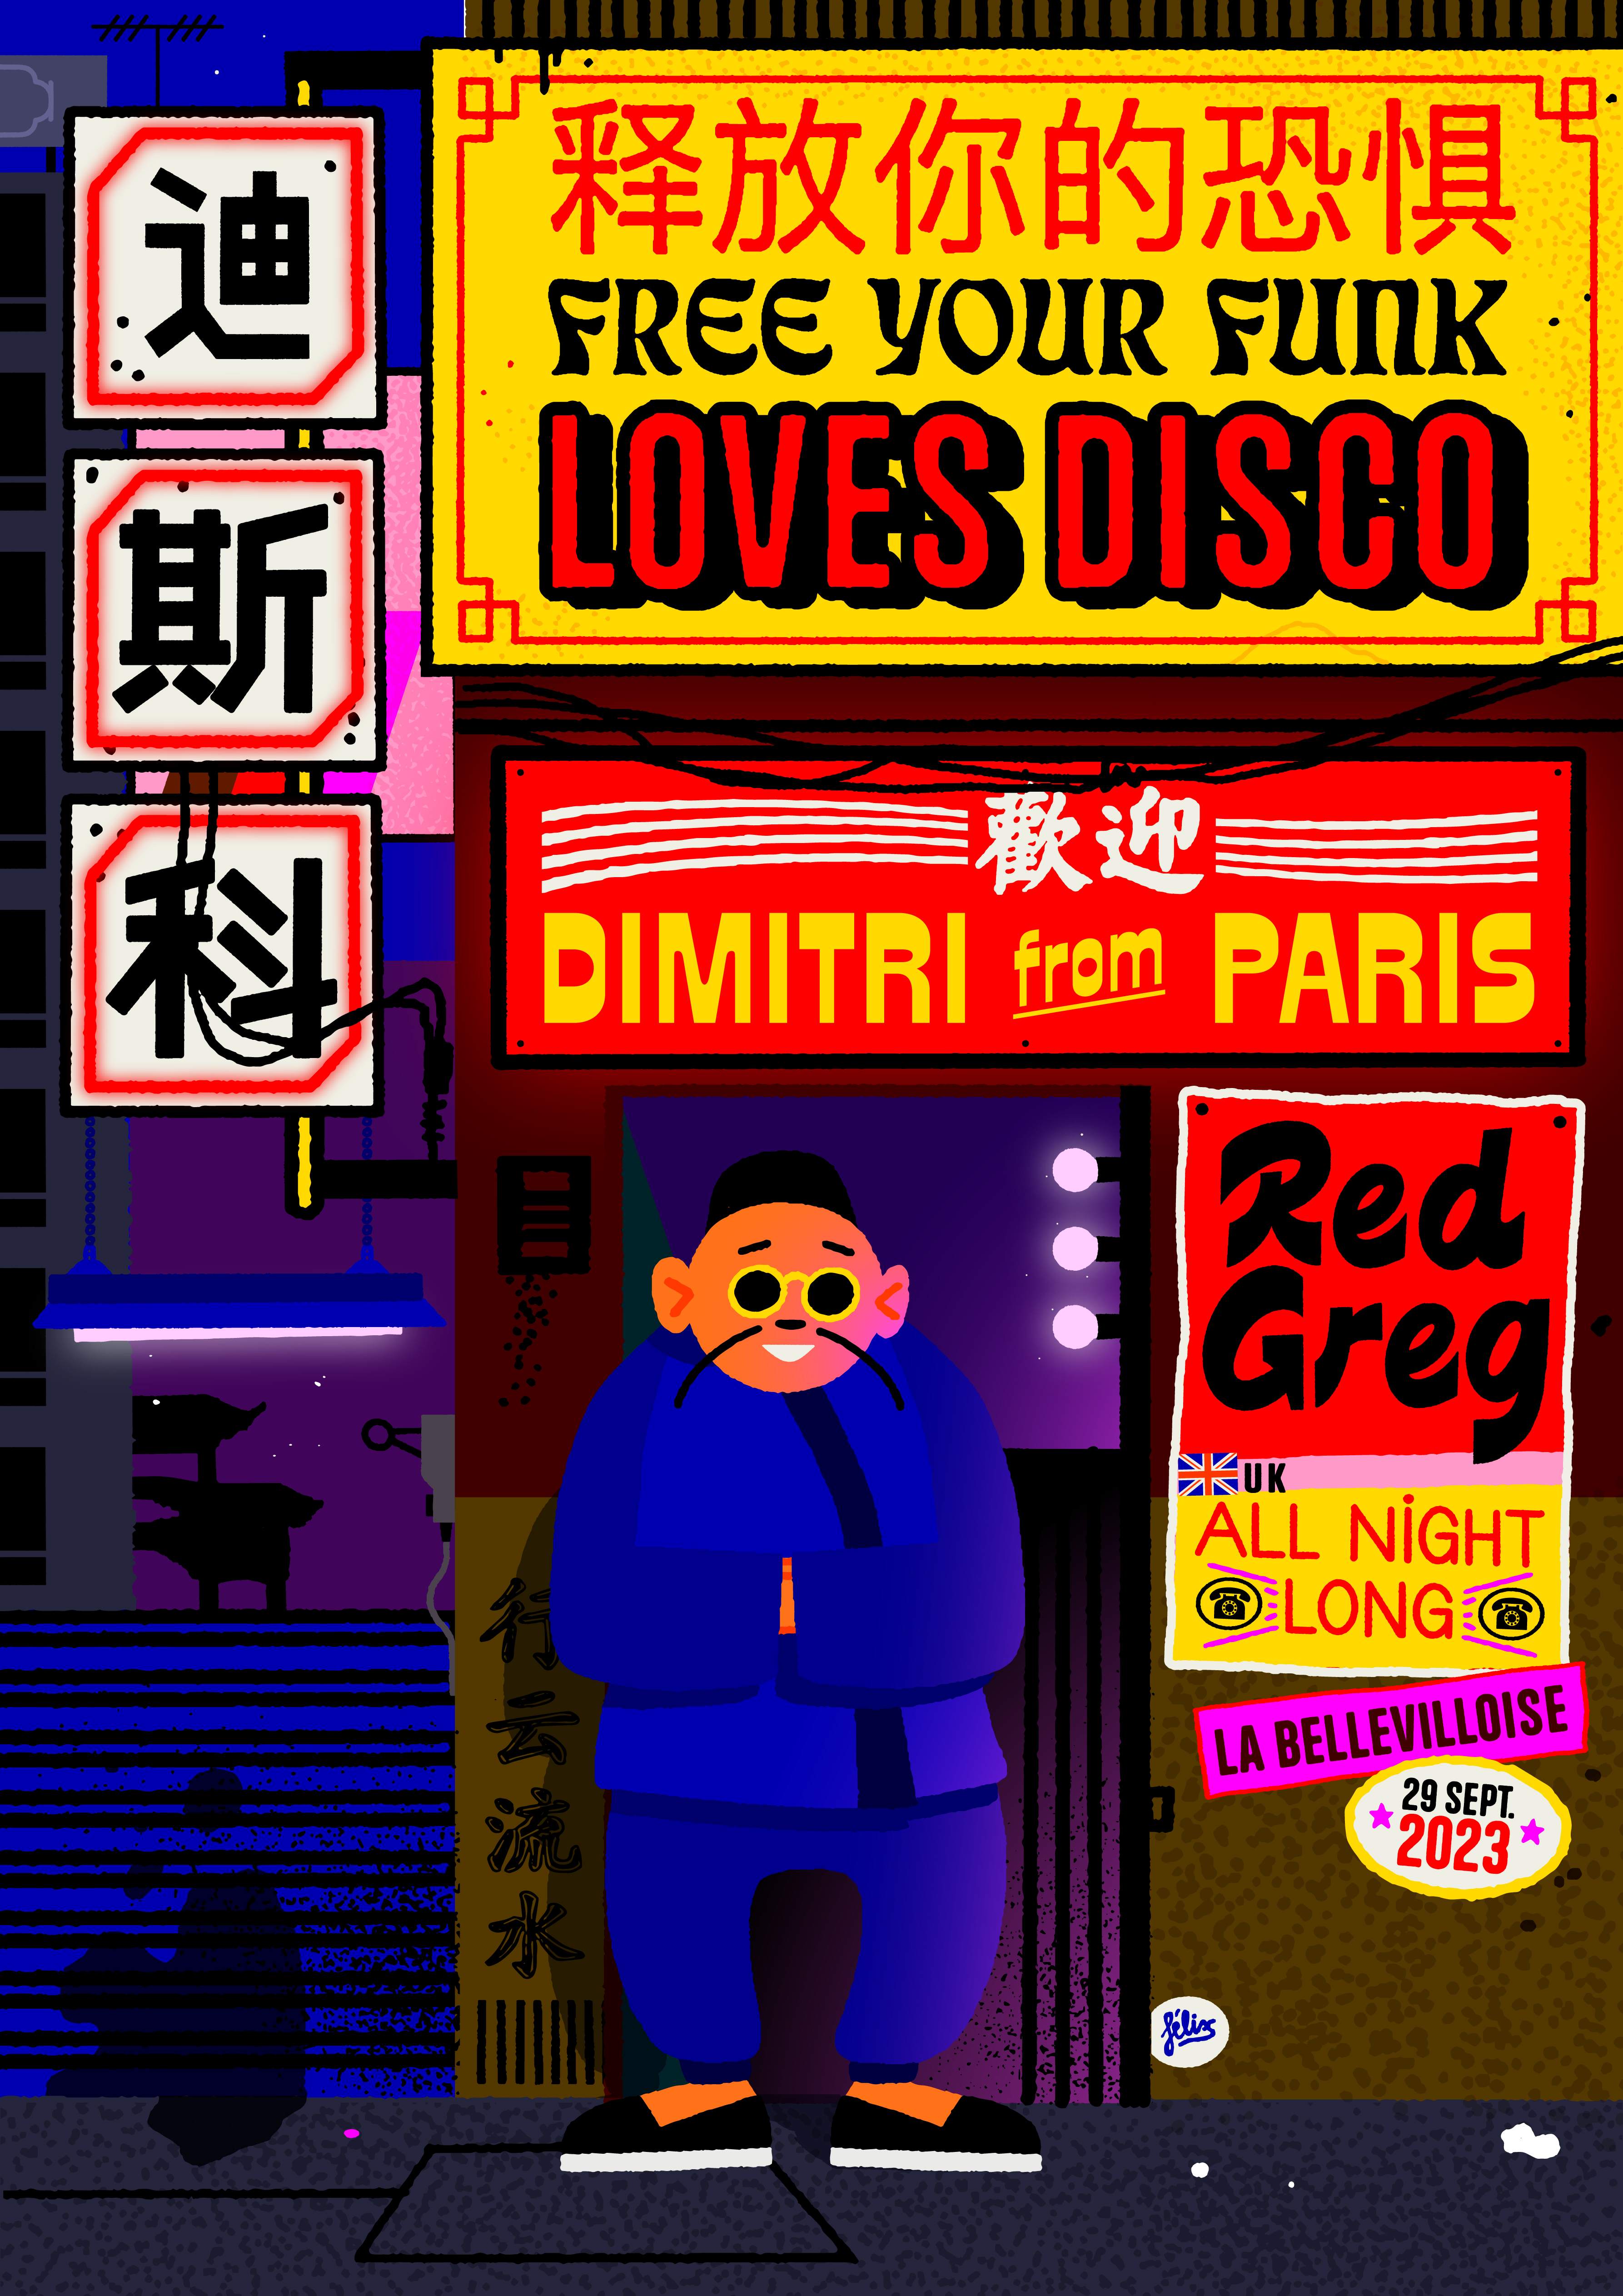 Free Your Funk Loves Disco: Dimitri From Paris & Red Greg All Night Long - フライヤー表